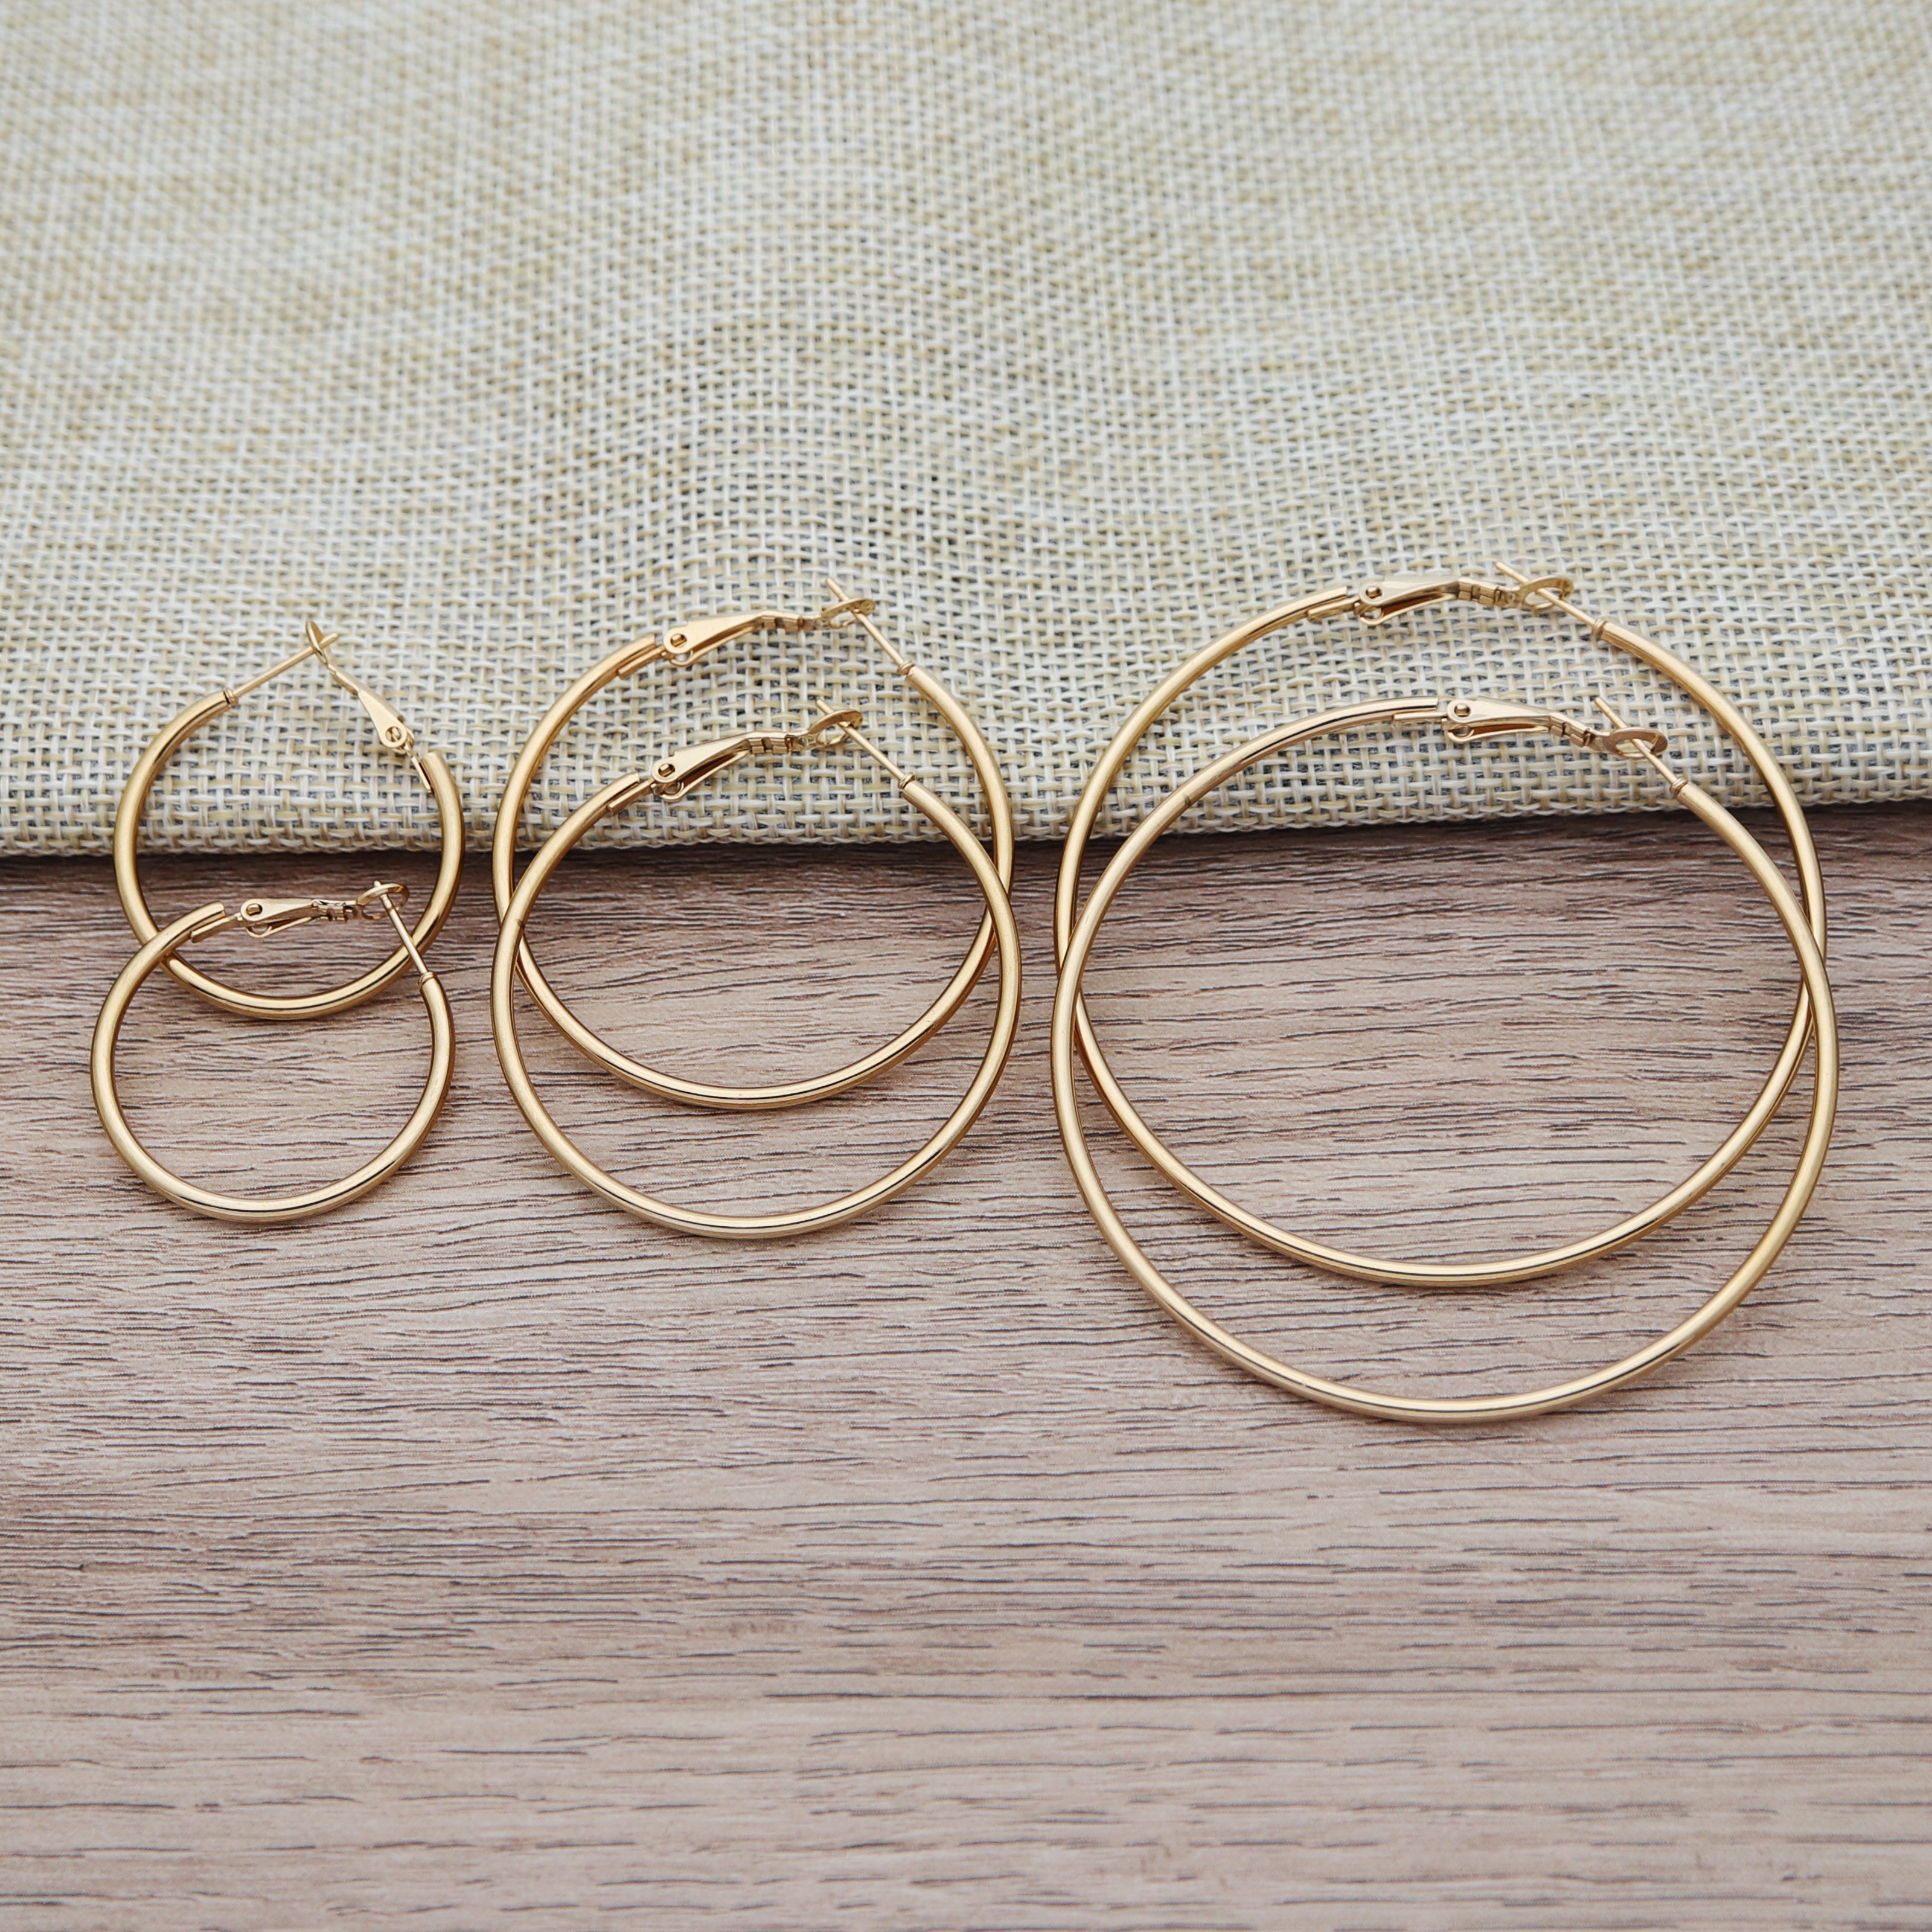 Stainless Steel Plain Wire Circle Hoop Women's Earrings - Gold-earrings, Hoop Earrings, Huggie Earrings, Jewellery, Stainless Steel, Women's Earrings, Women's Jewellery-ER0080-G-A-Glitters